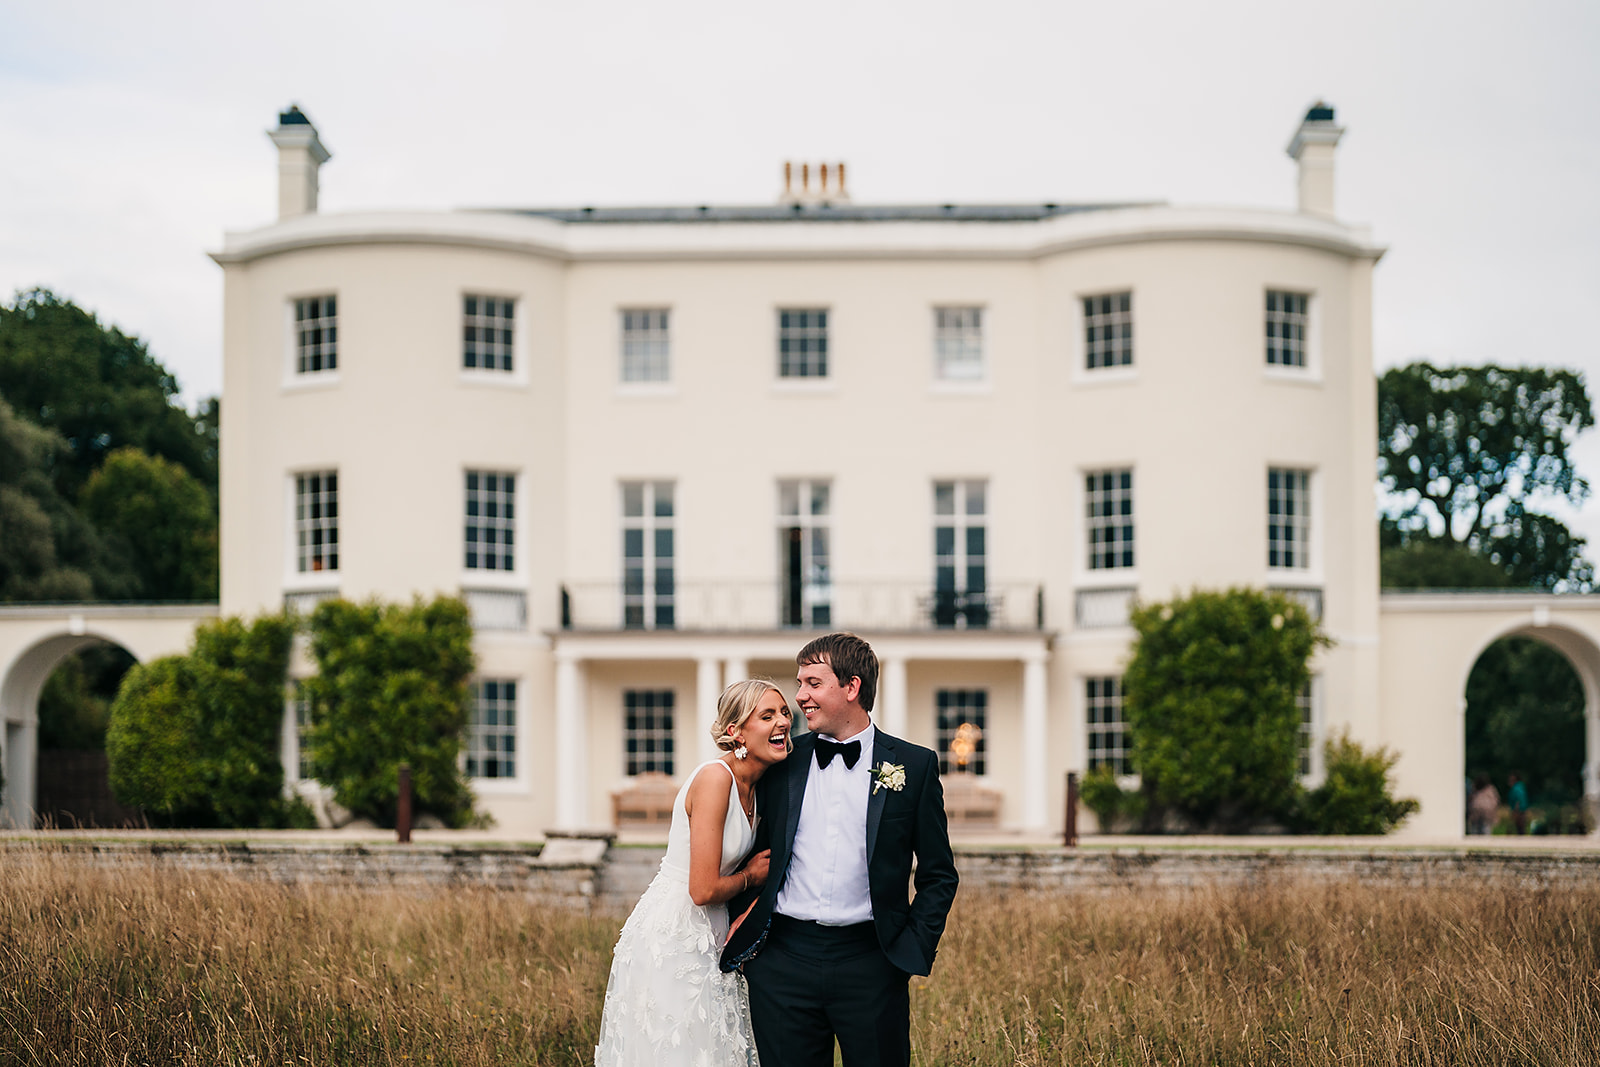 A Devon wedding photographer captures a bride and groom in front of Rockbeare Manor, a large white mansion.